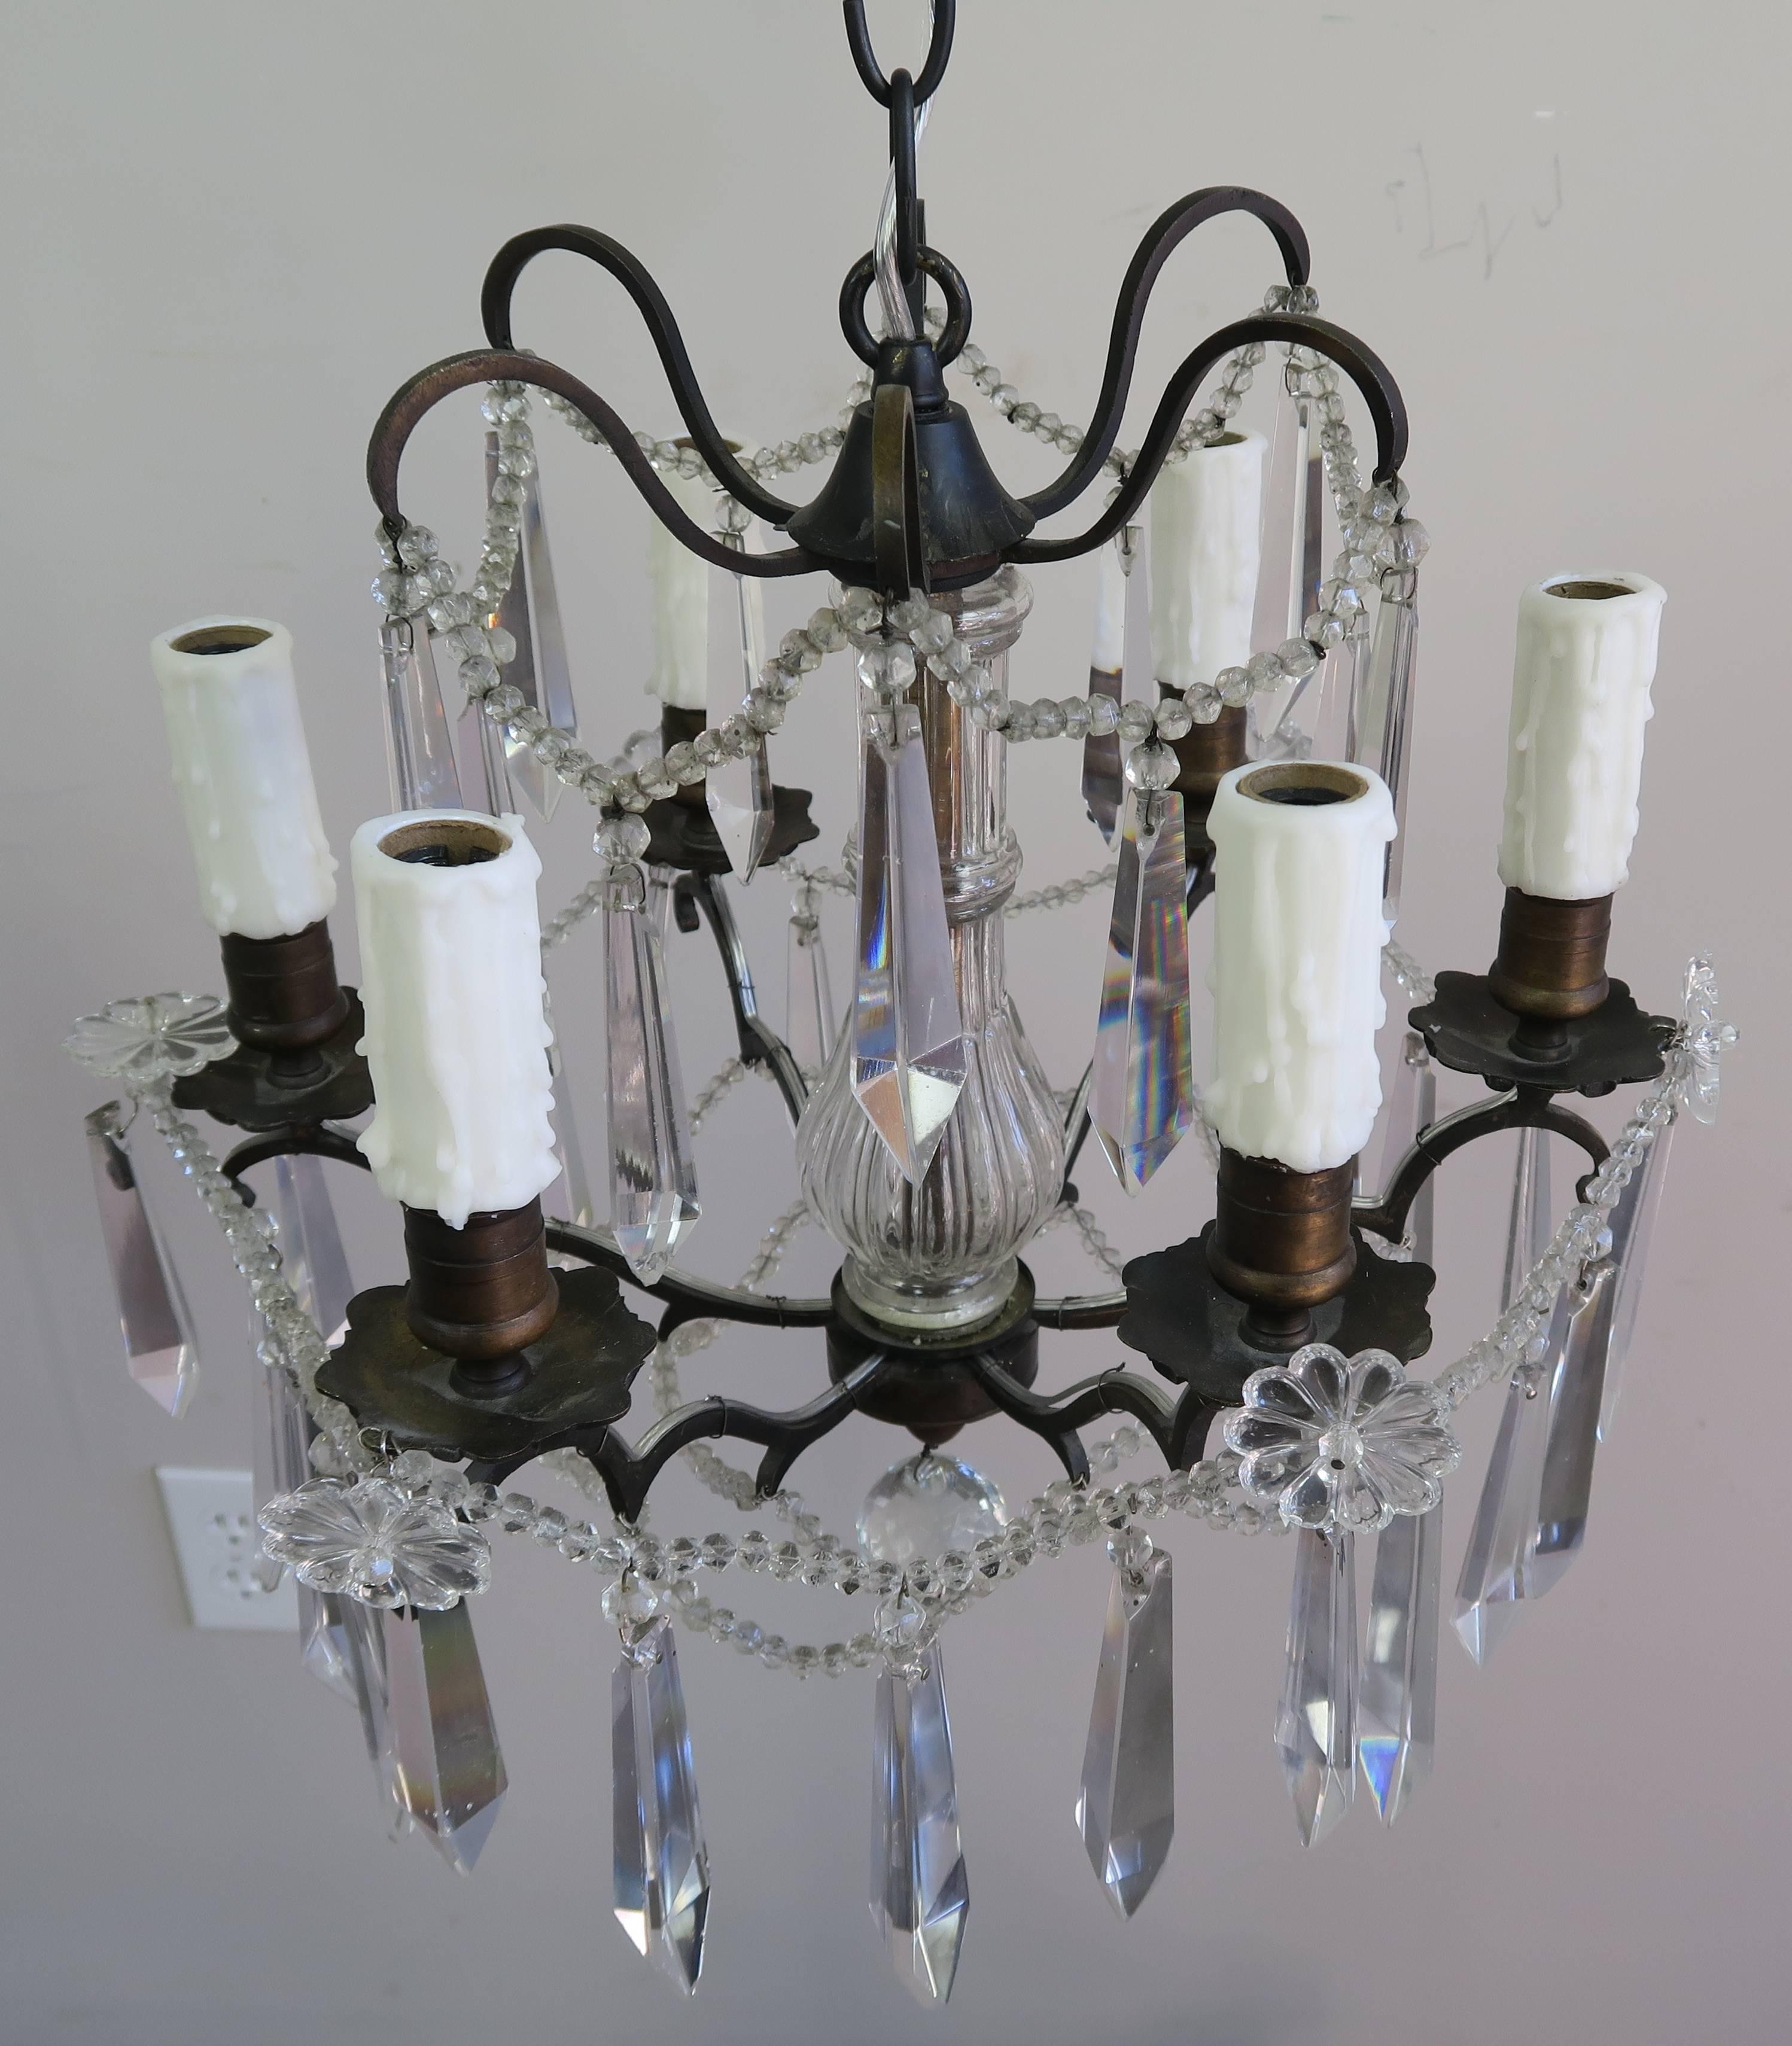 Pair of French bronze and crystal chandeliers newly rewired with drip wax candle covers. Includes chain and canopies.